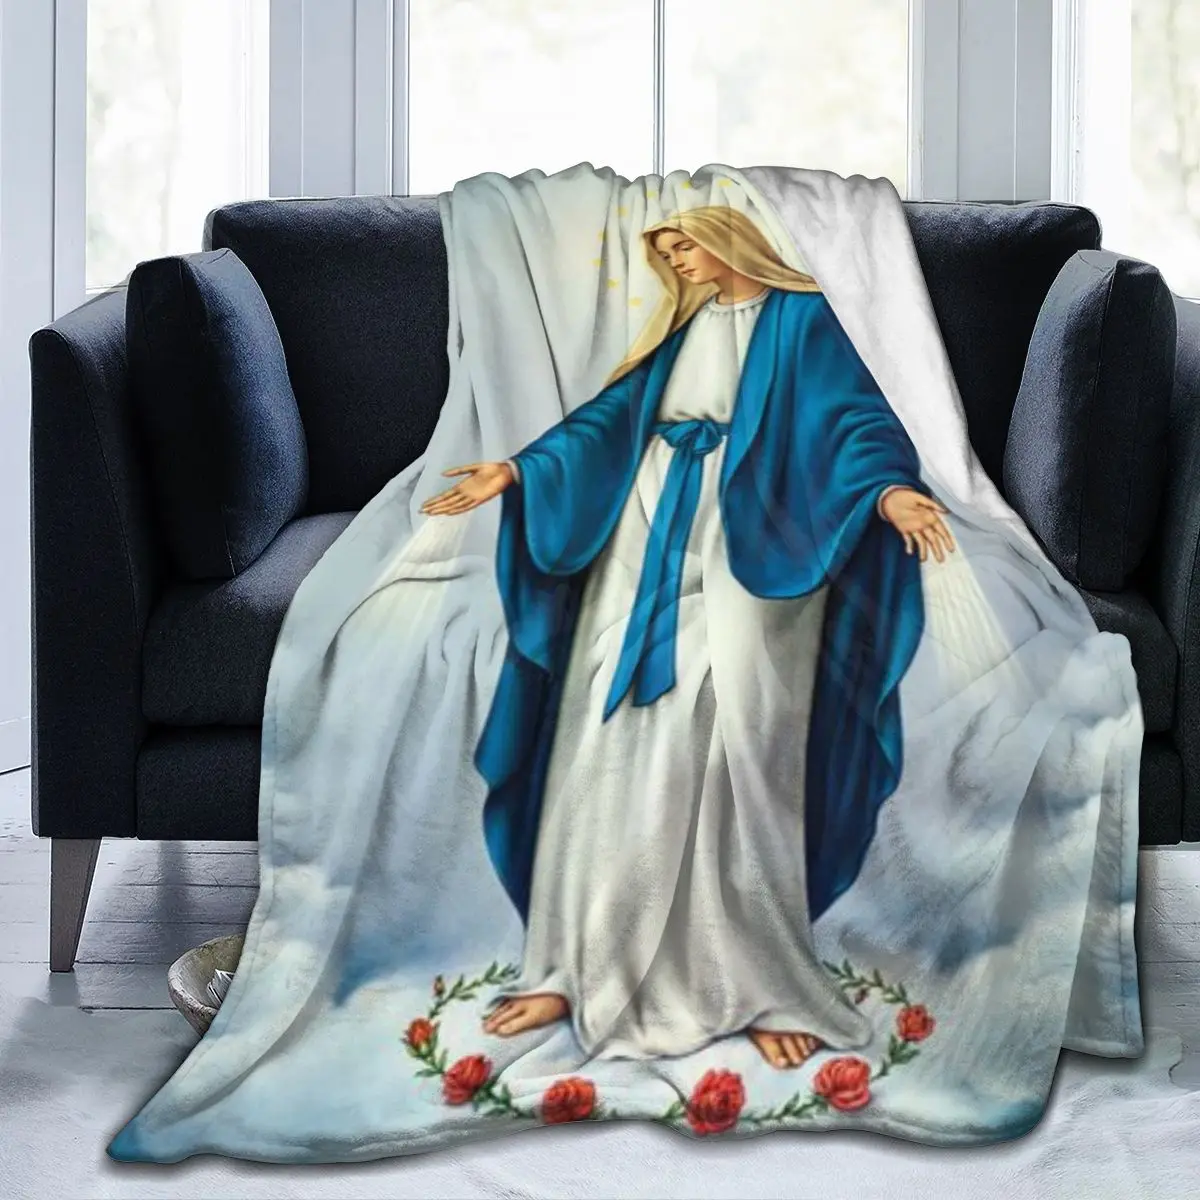 

Virgin Mary Blanket Our Lady of Guadalupe Flannel Blanket Warm Gifts for Mom Cozy Fuzzy Throw Sofa Couch Bedding Living Room